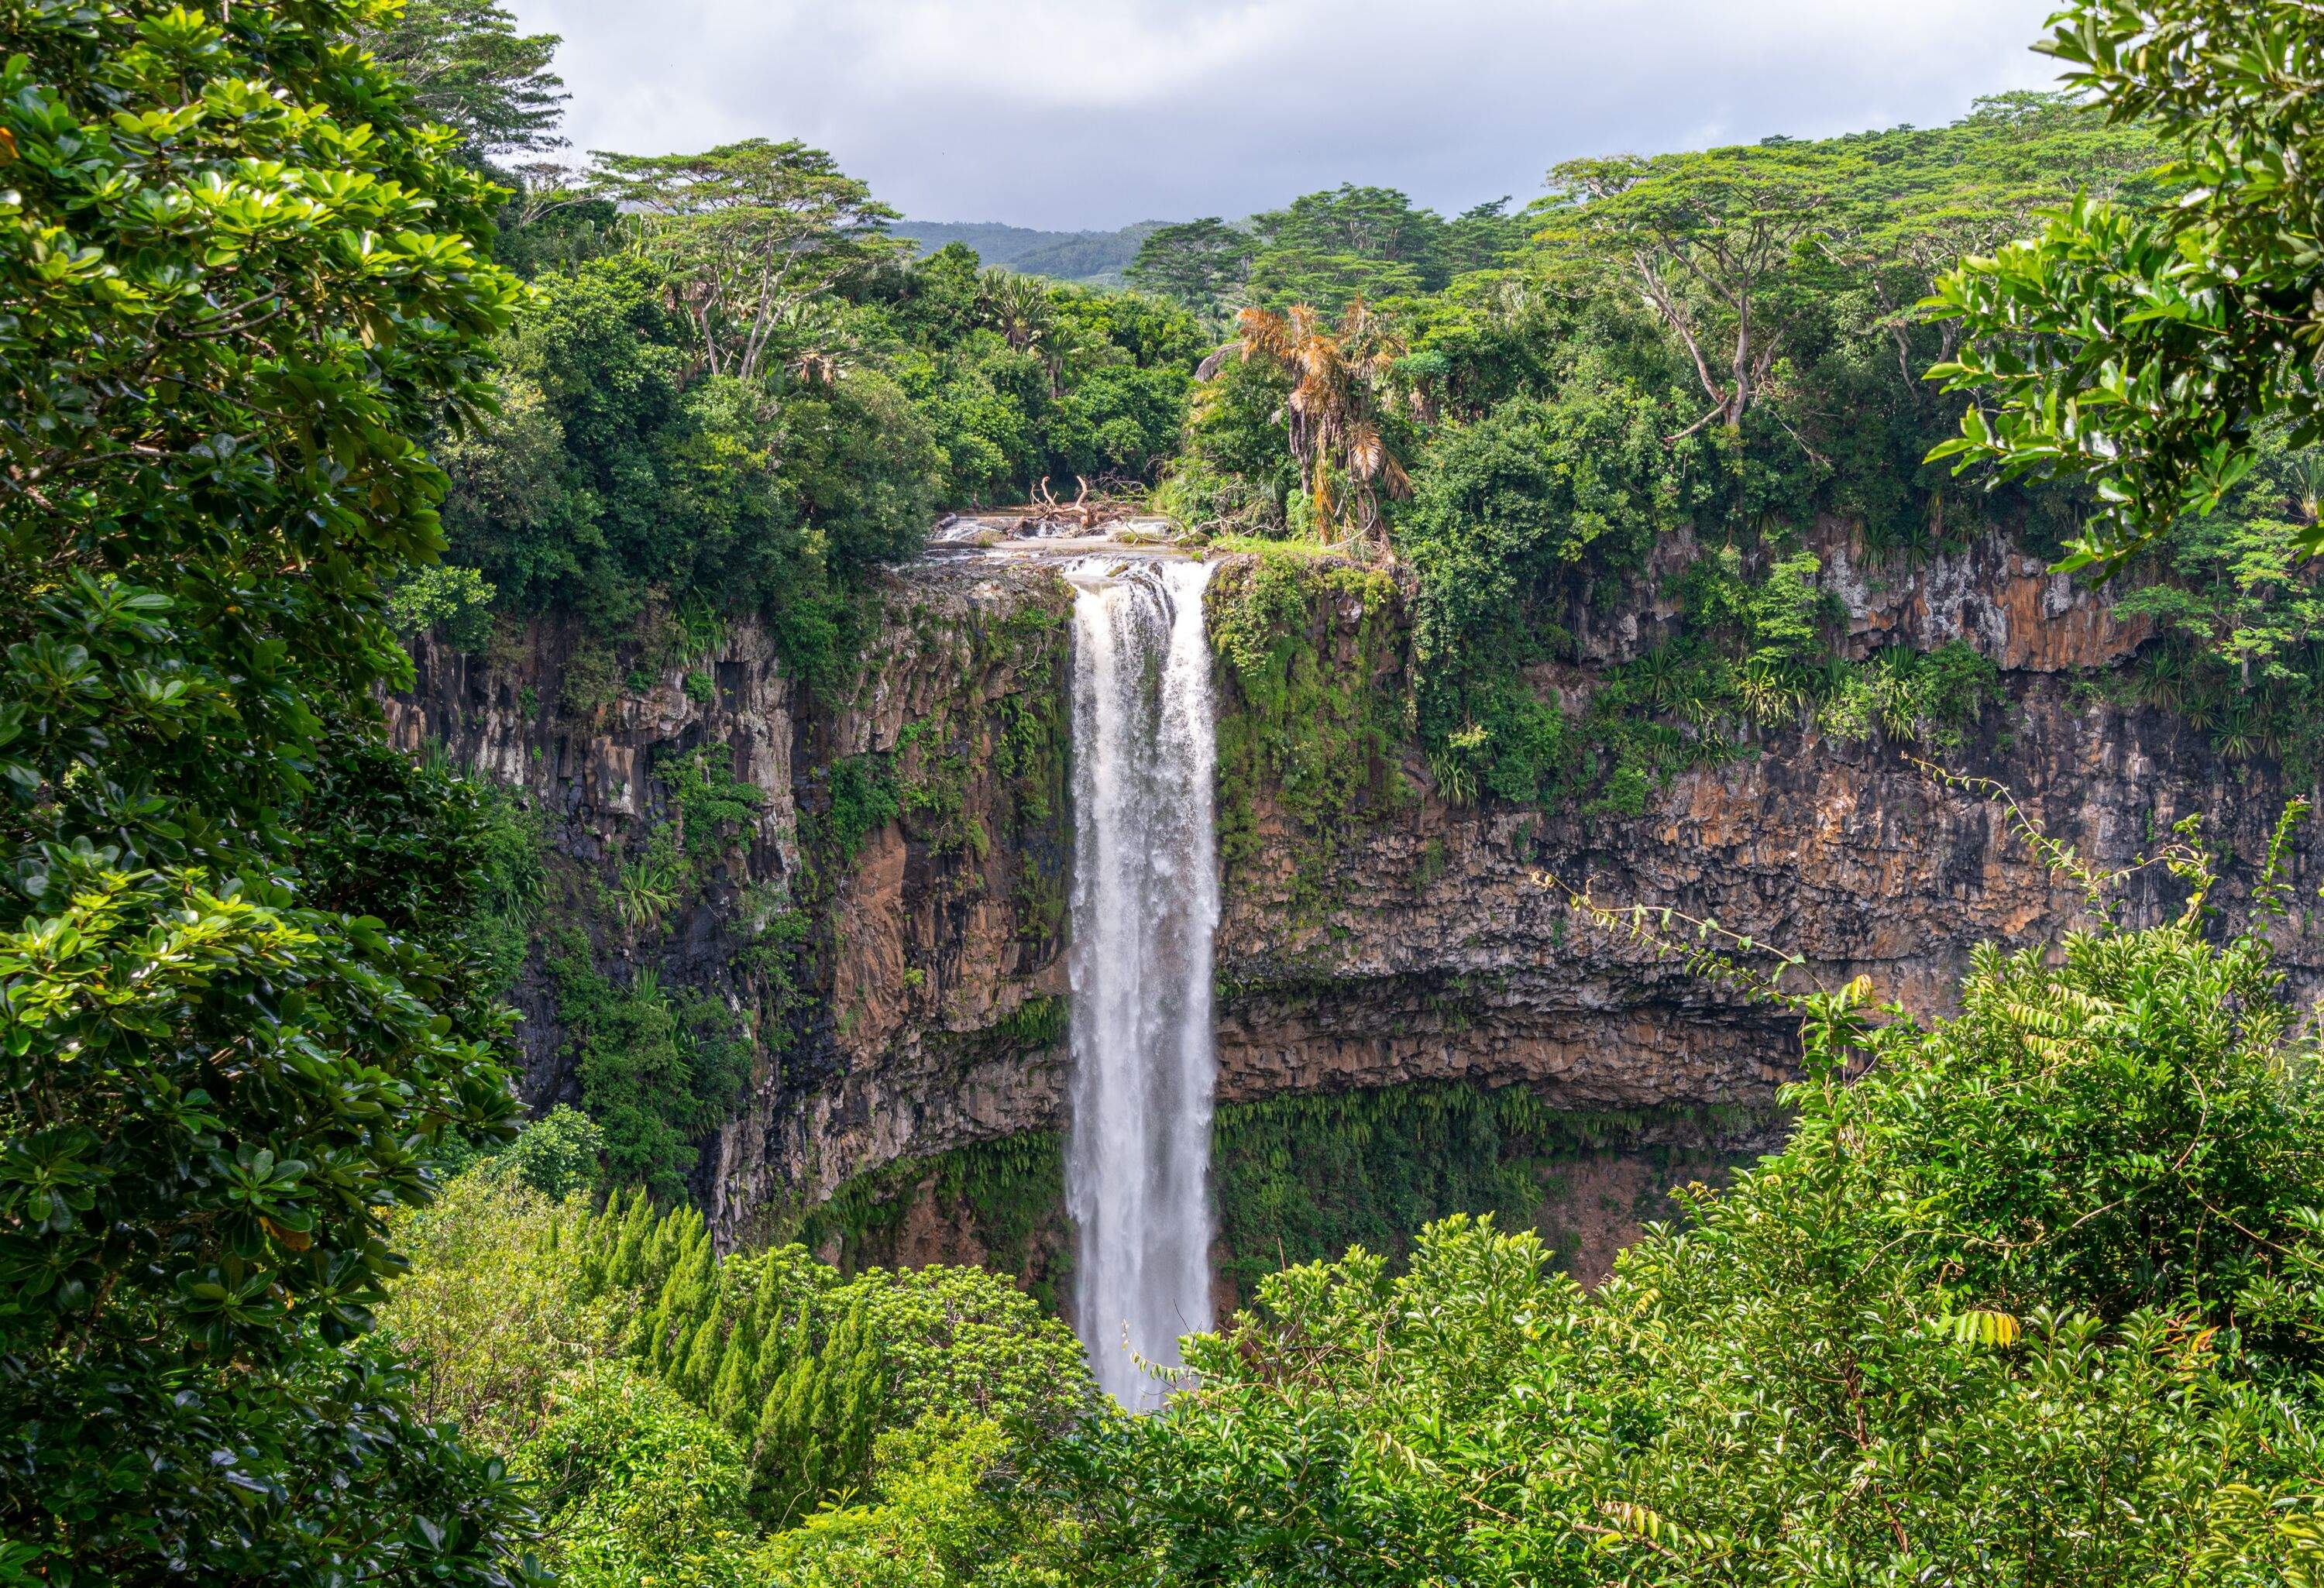 The Chamarel Waterfalls on the Indian Ocean island of Mauritius are 90m high and fall from the River St Denis in the Black River Mountains to form the River du Cap below.